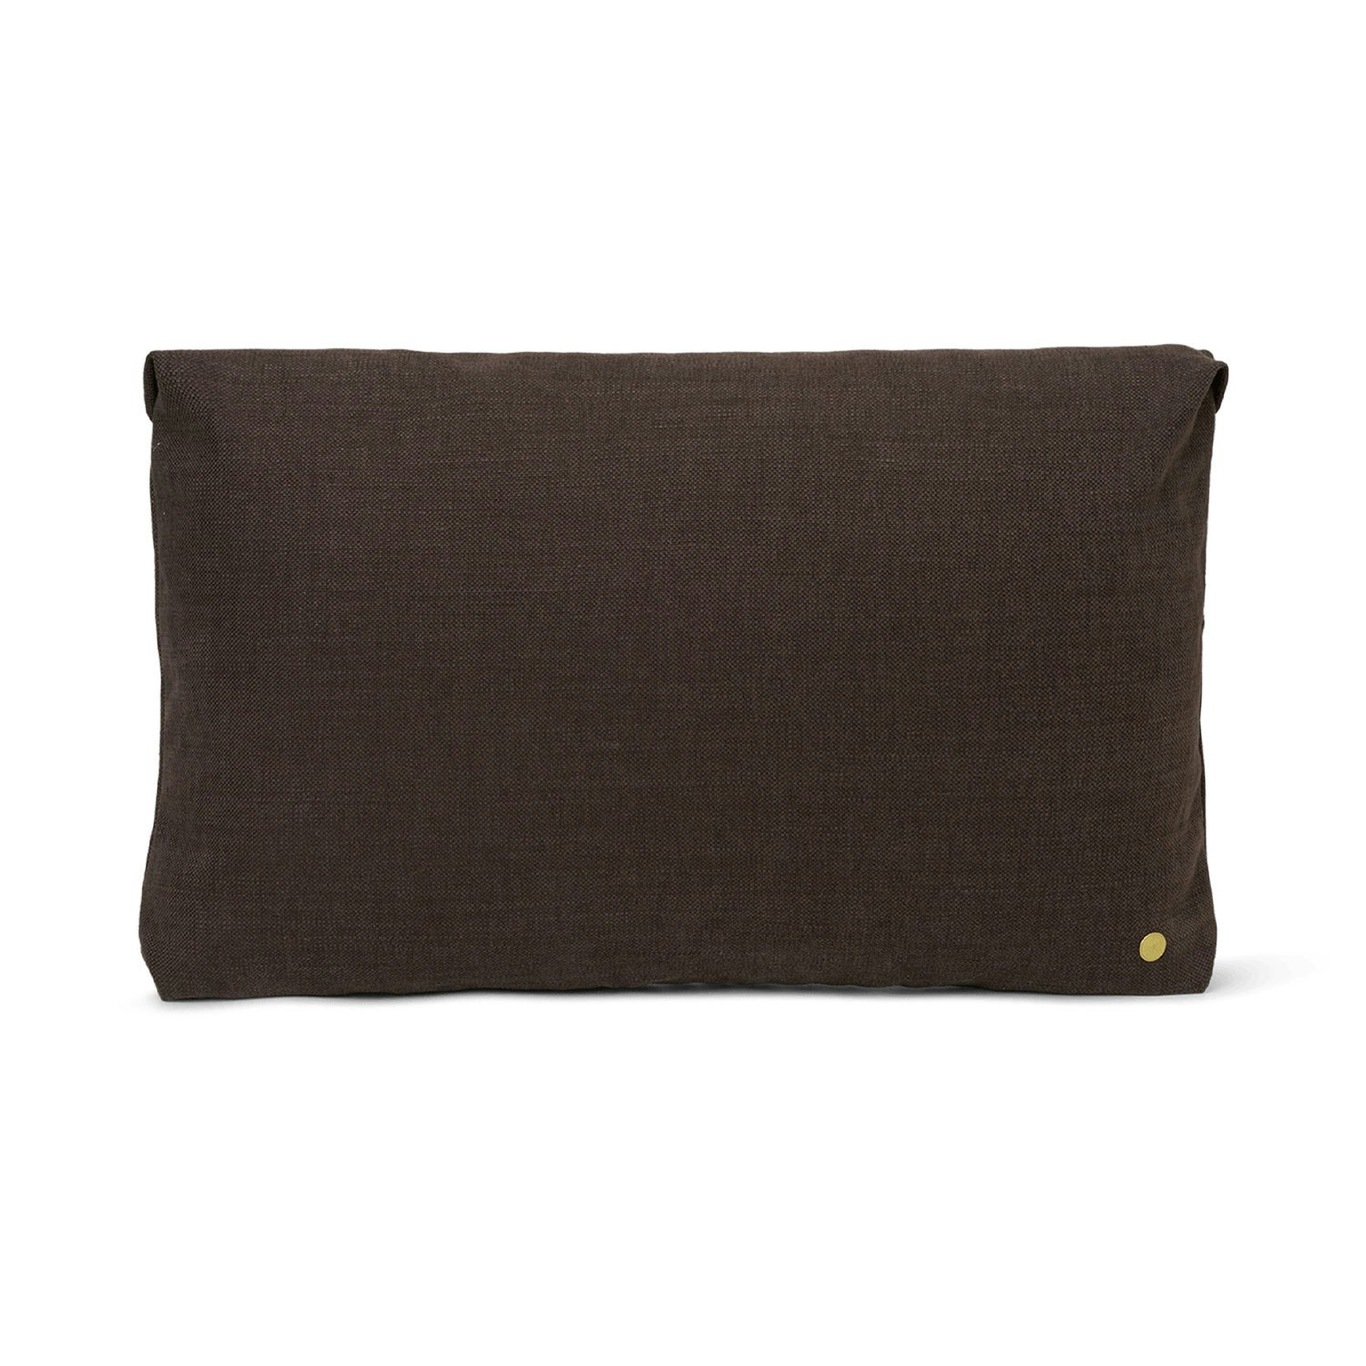 Clean Scatter Cushion Hot Madison 60x40 cm, Chocolate